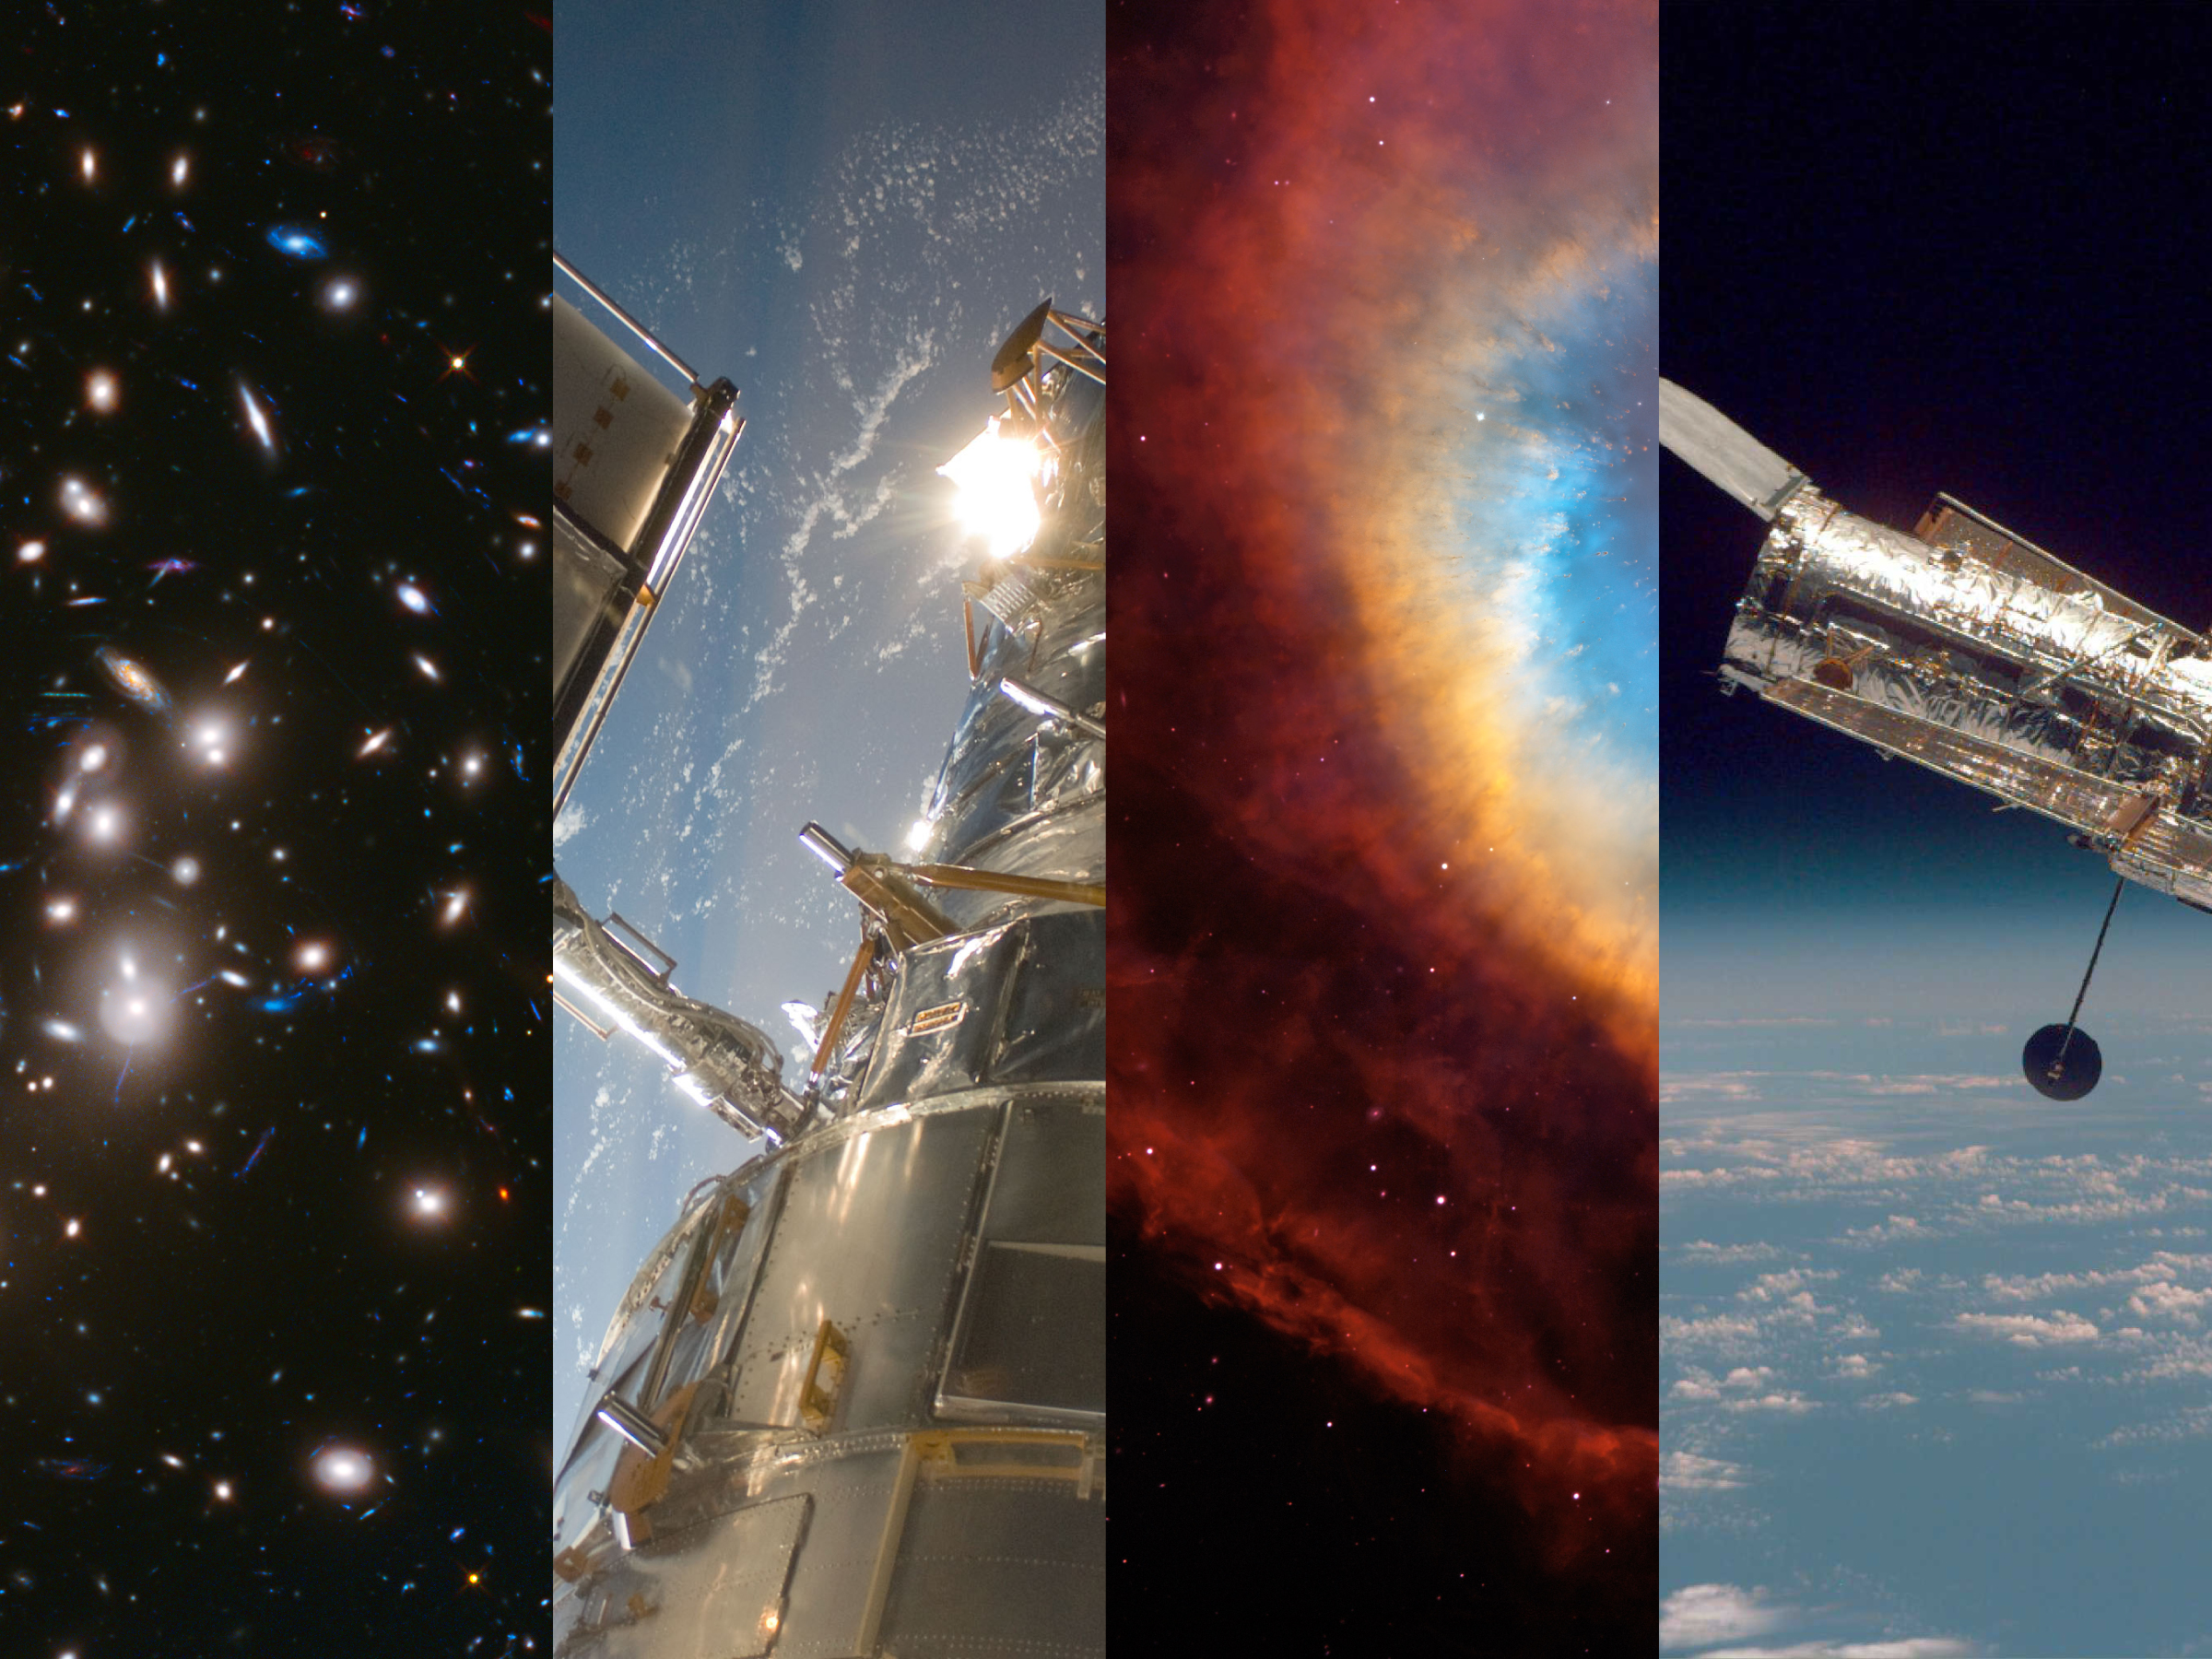 Celebrate Hubble’s 25th Birthday With Its Most Gorgeous Images